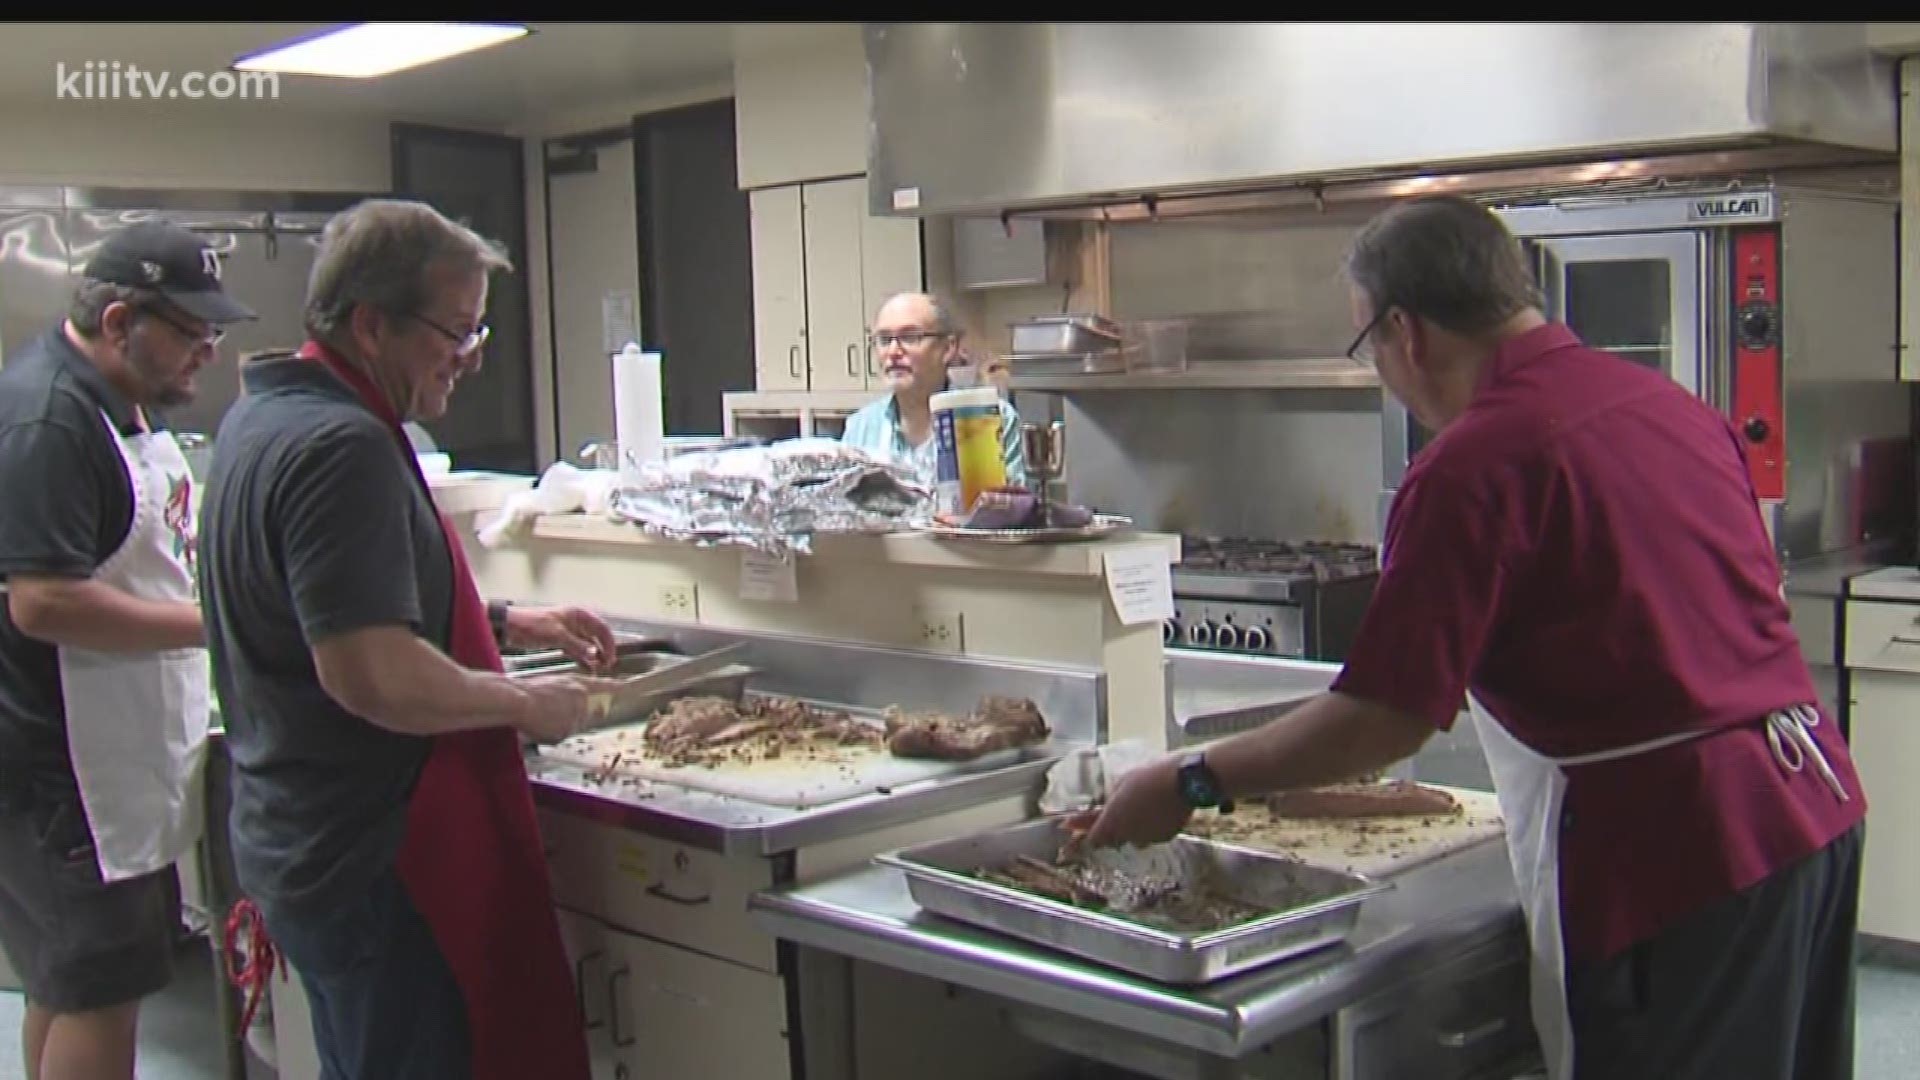 Members of the Temple's sisterhood are putting on their 33rd annual Jewish Food Fest and expect a large crowd.